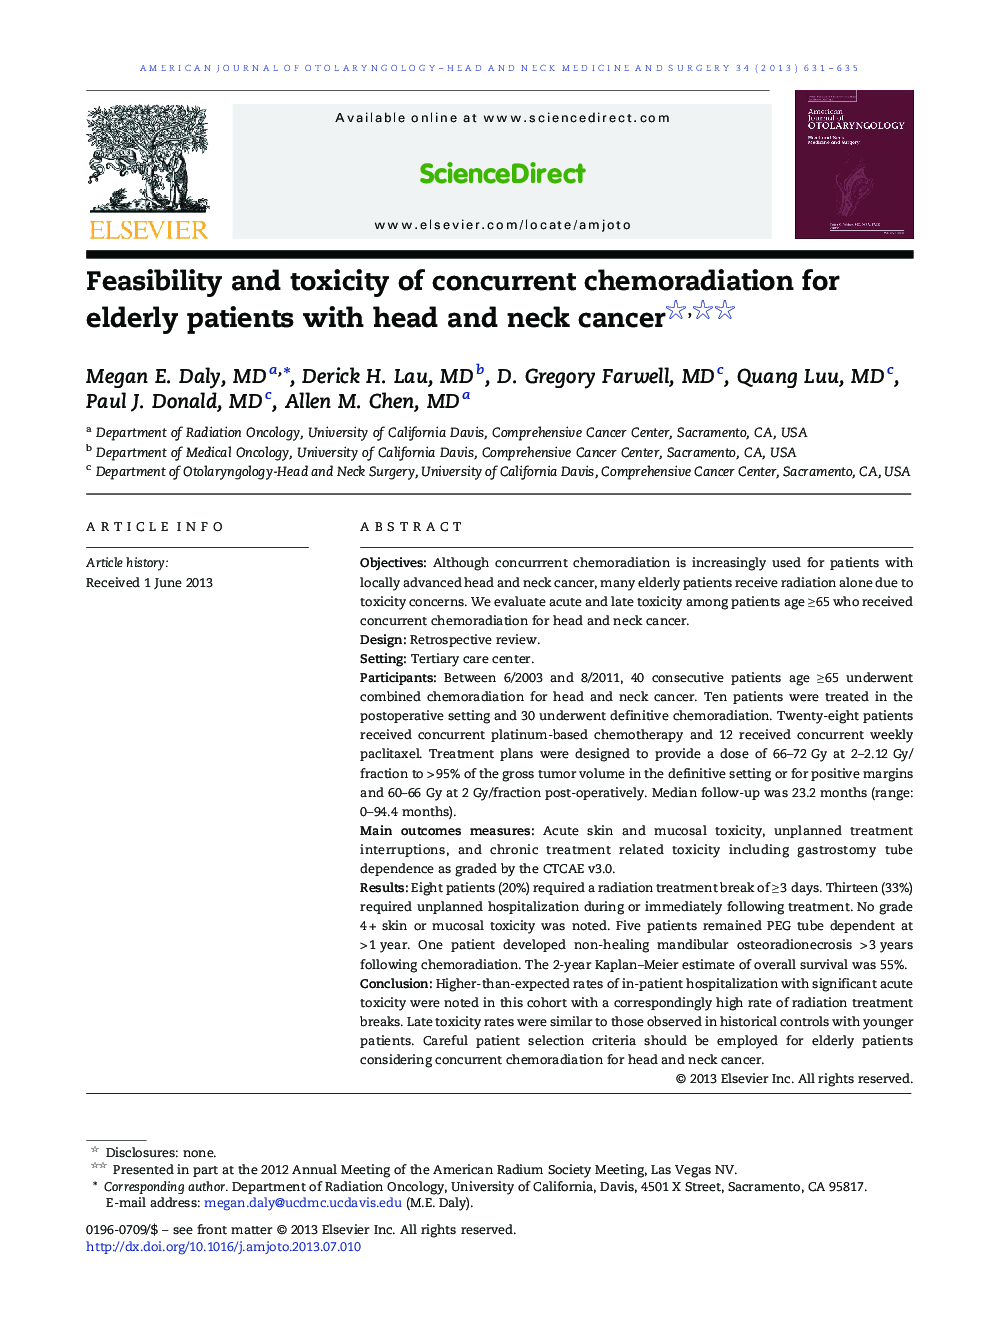 Feasibility and toxicity of concurrent chemoradiation for elderly patients with head and neck cancer 